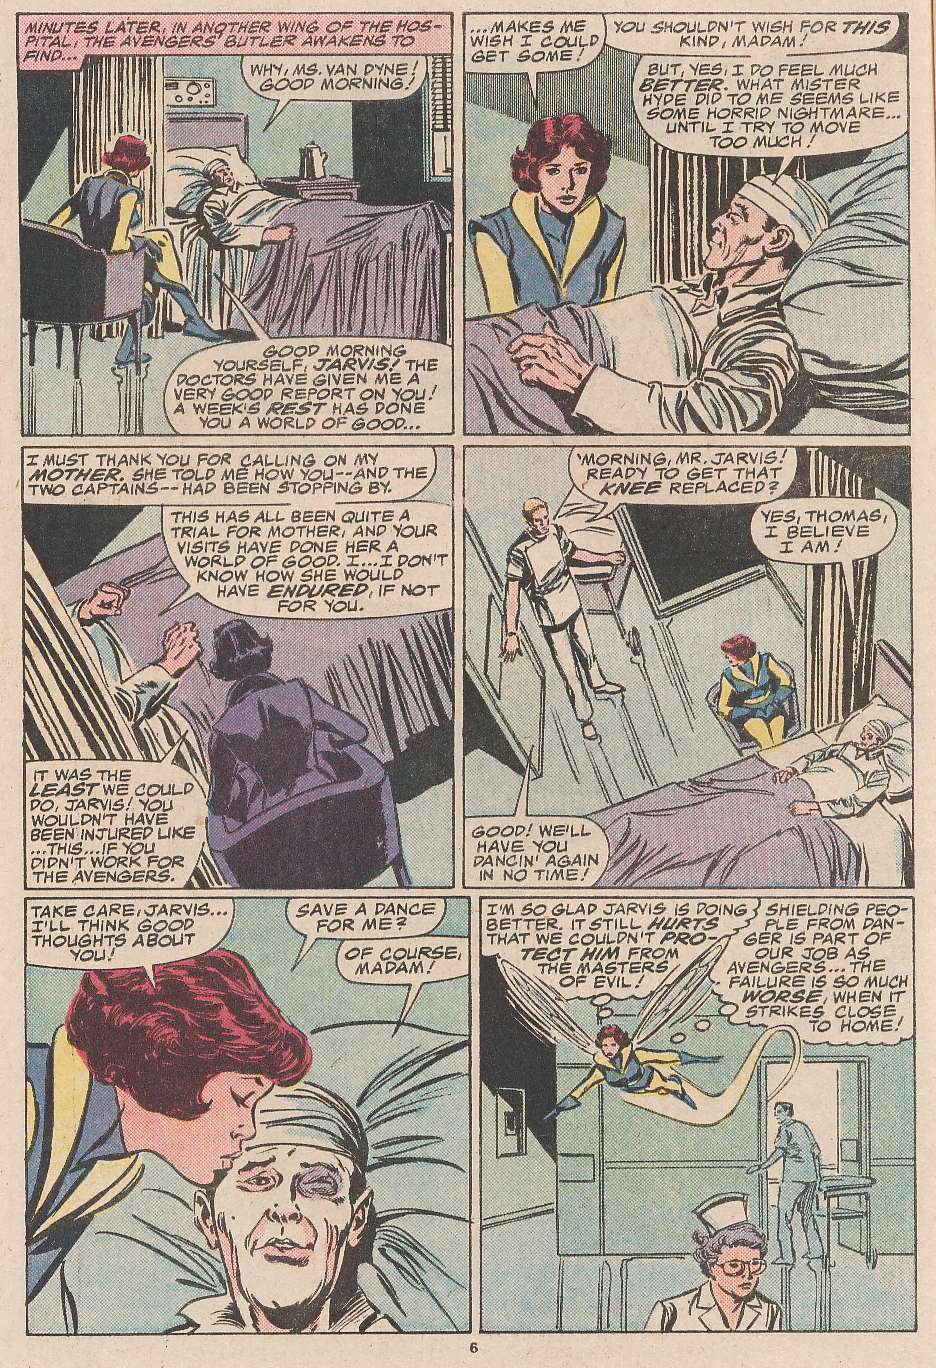 The Avengers (1963) 278 Page 6